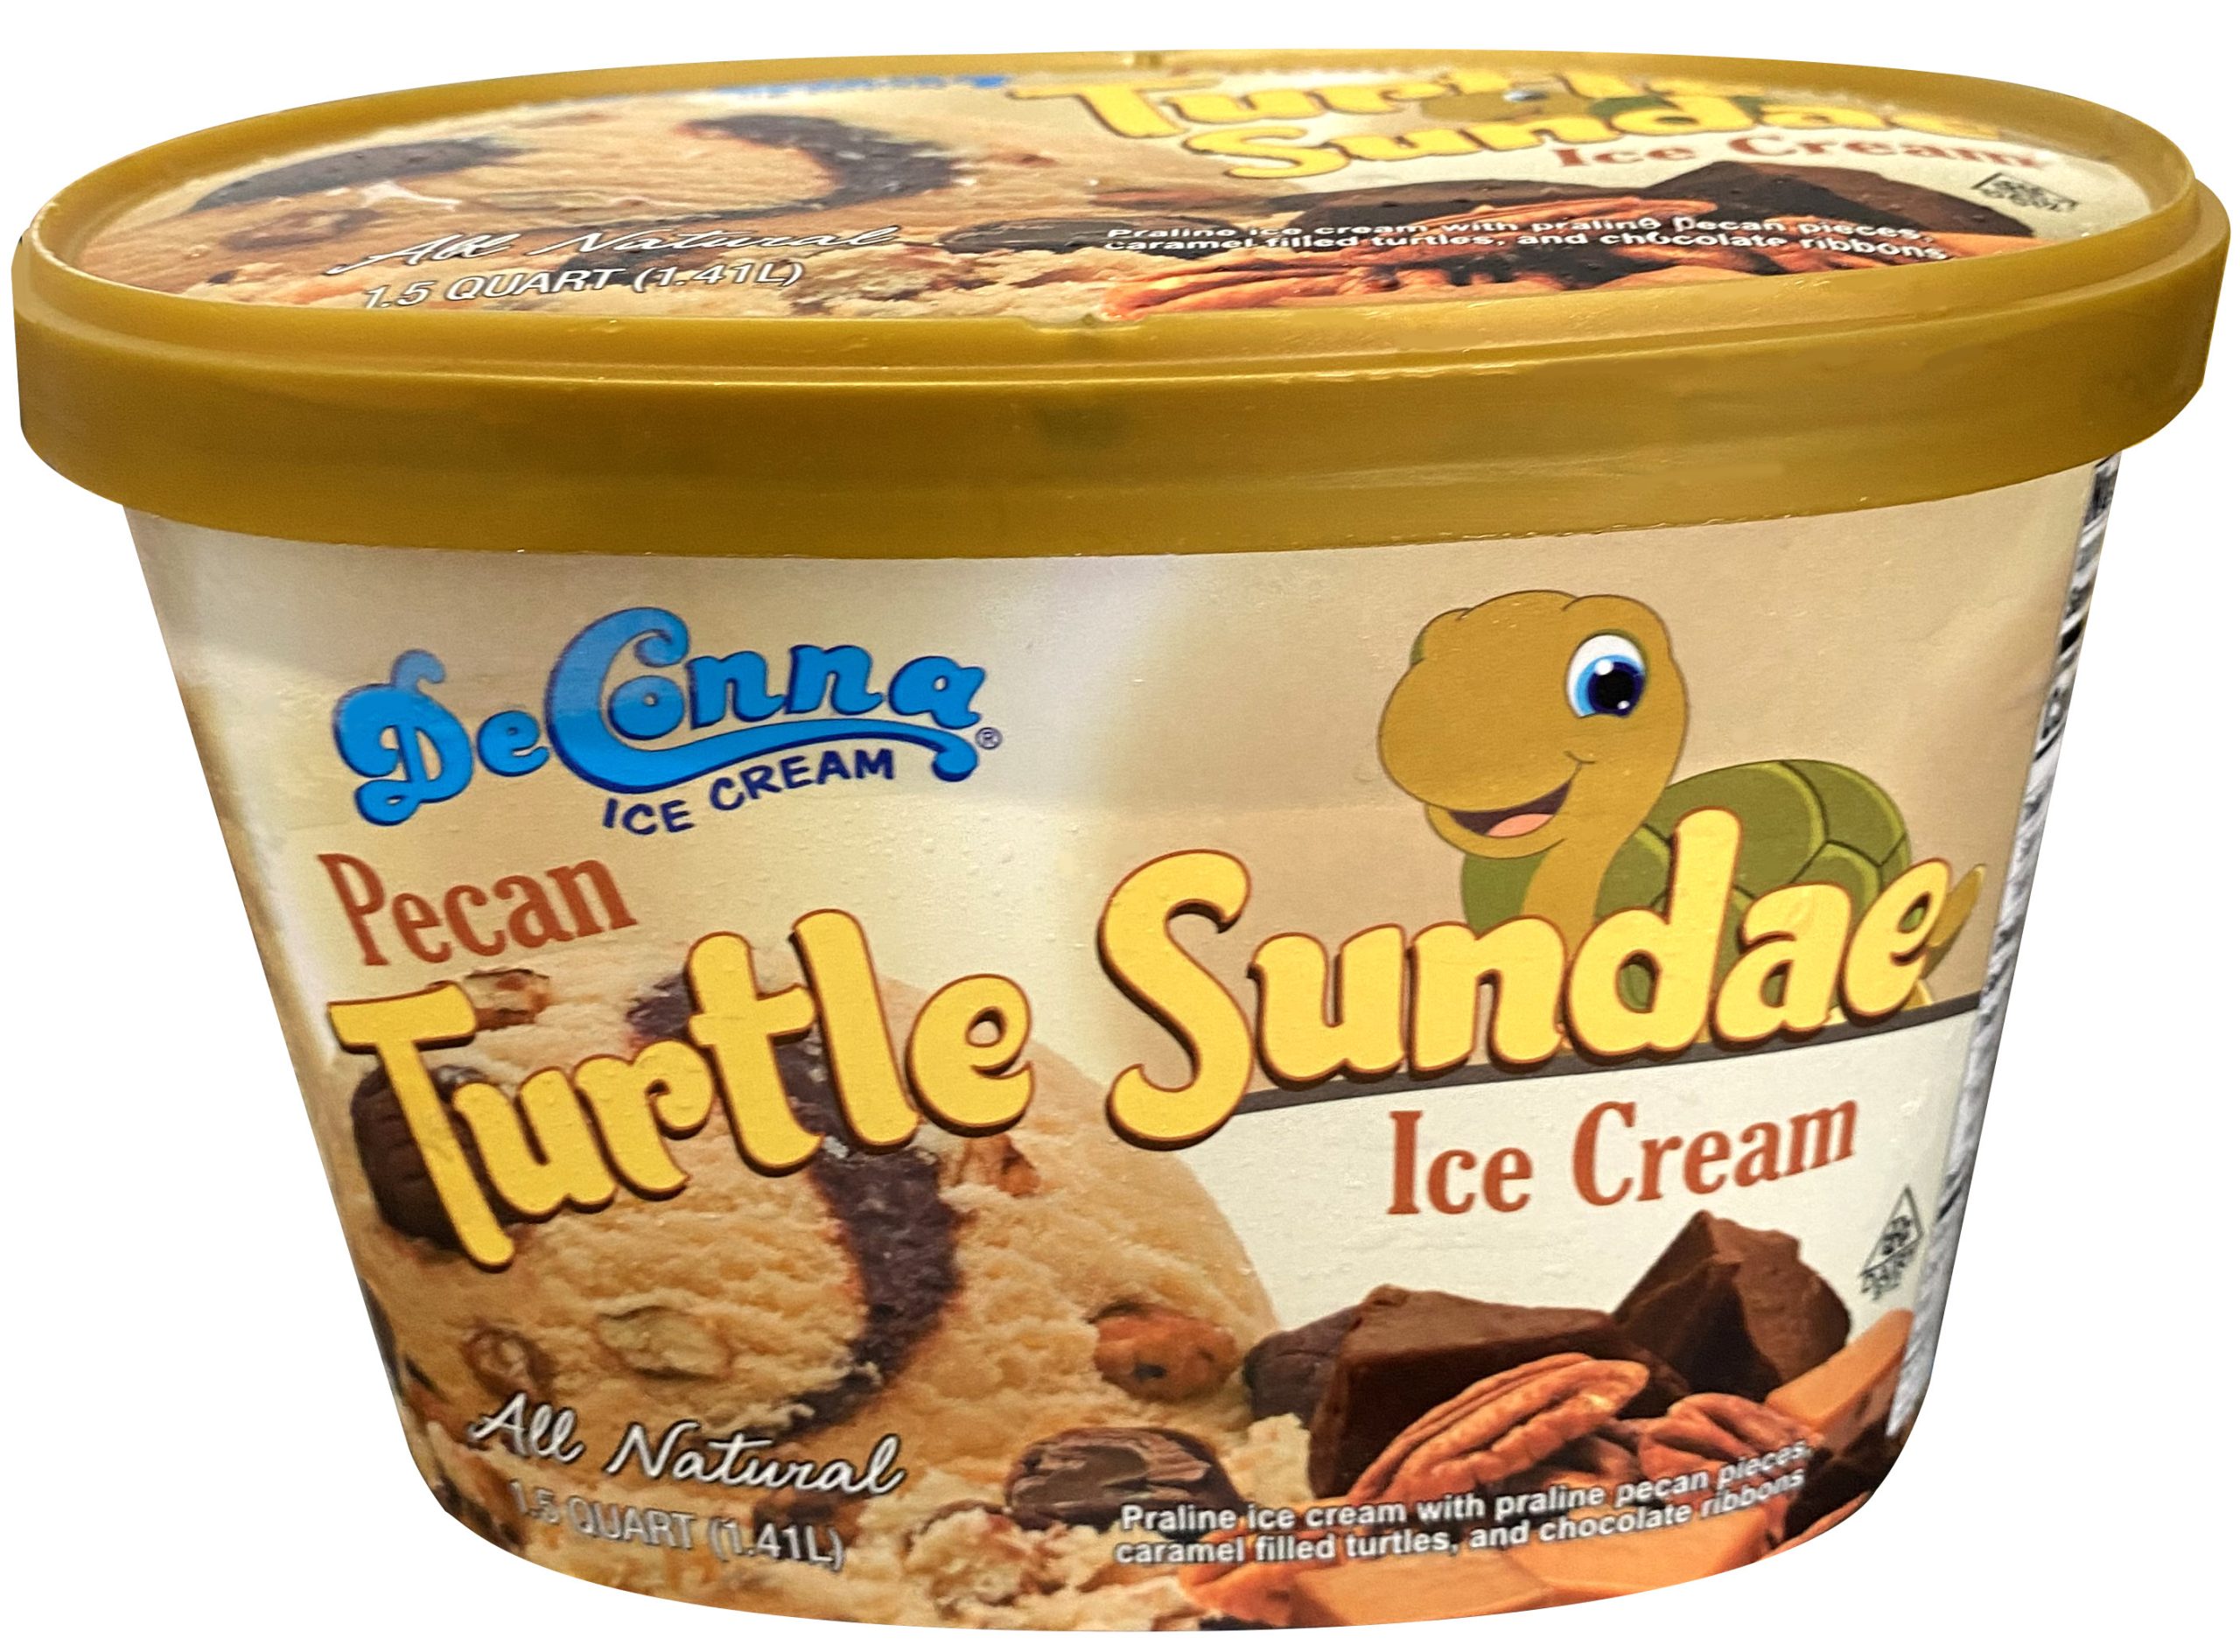 Wholesale Ice Cream: Buying in Bulk for Business or Events